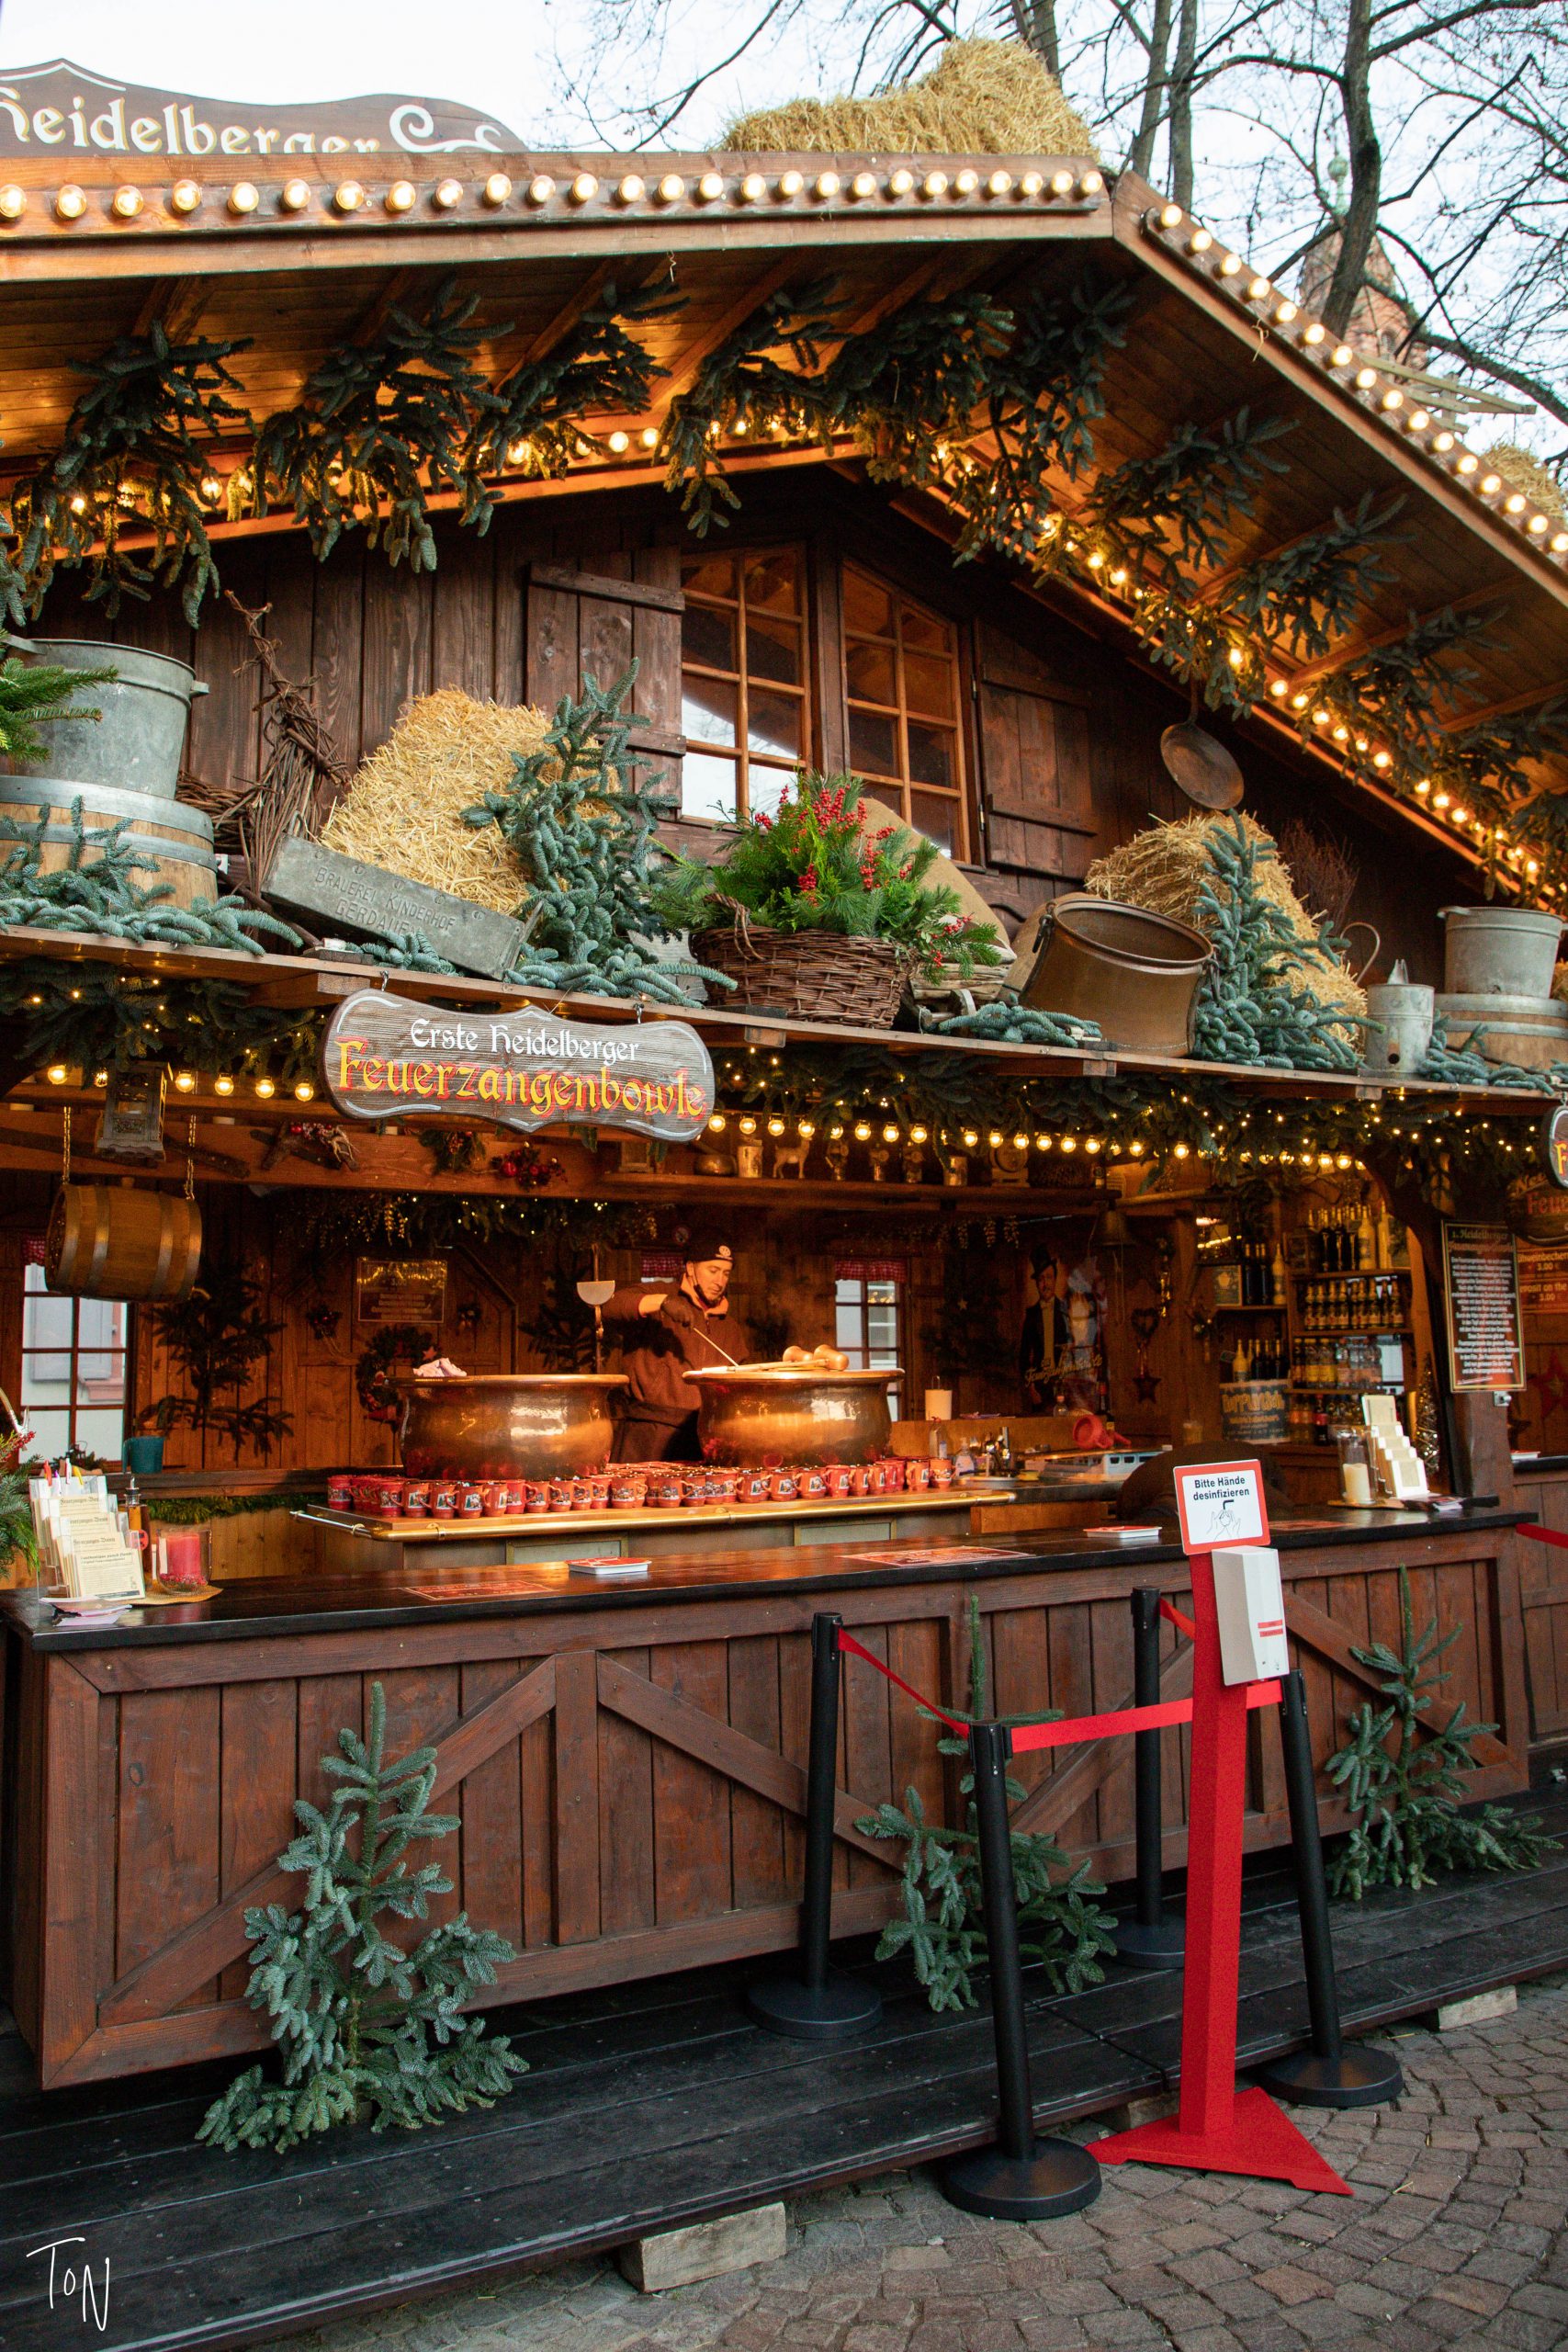 The Ultimate Guide to the Heidelberg Christmas Markets